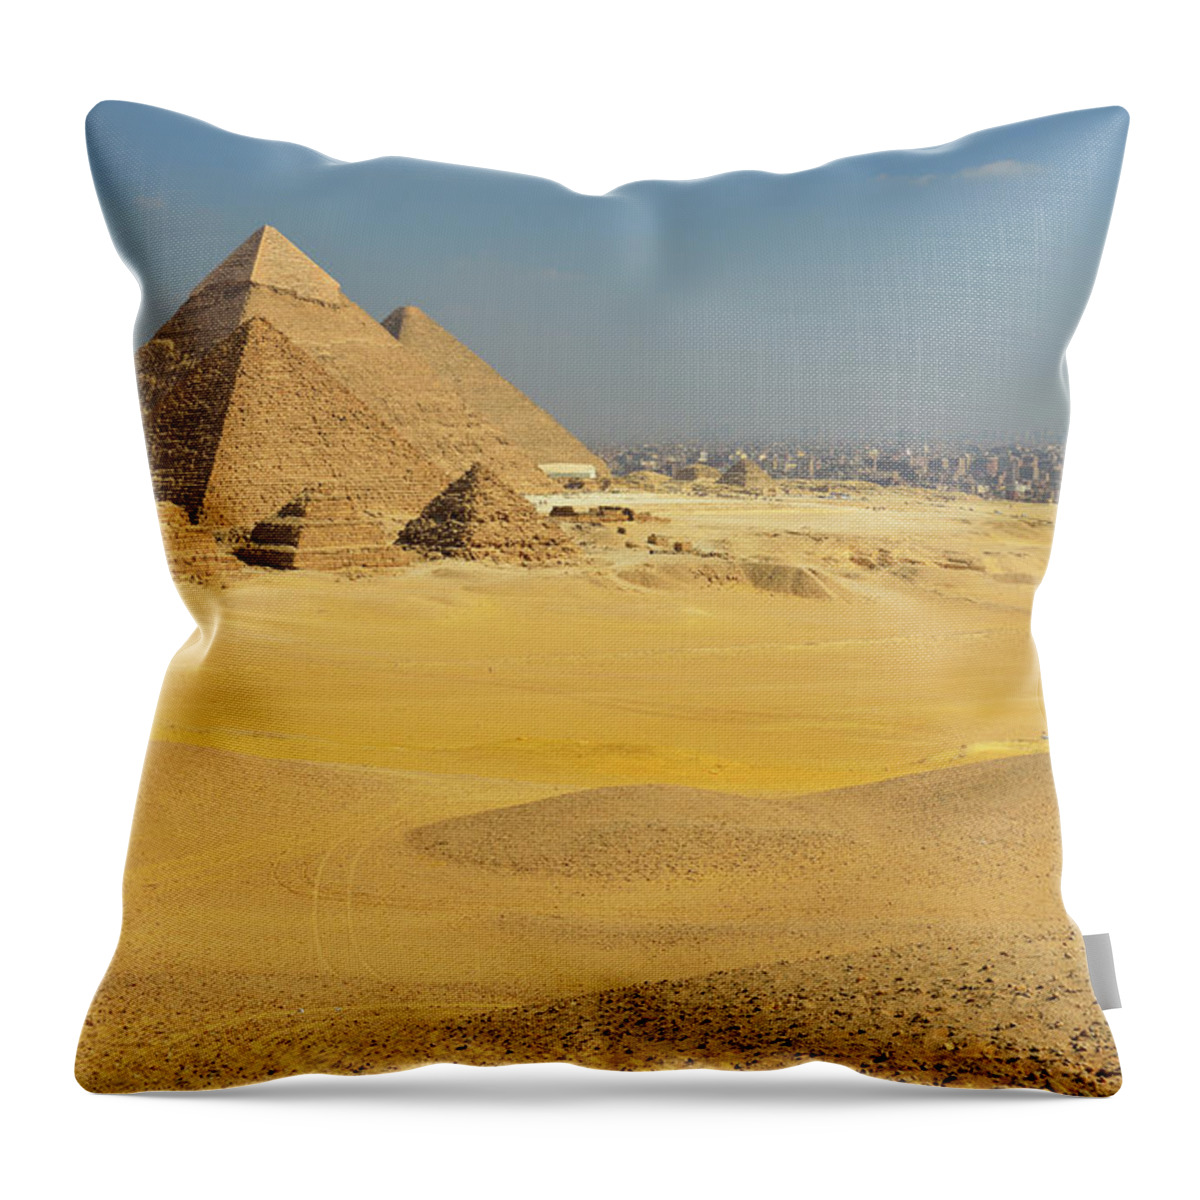 Built Structure Throw Pillow featuring the photograph Pyramids Of Giza by Raimund Linke